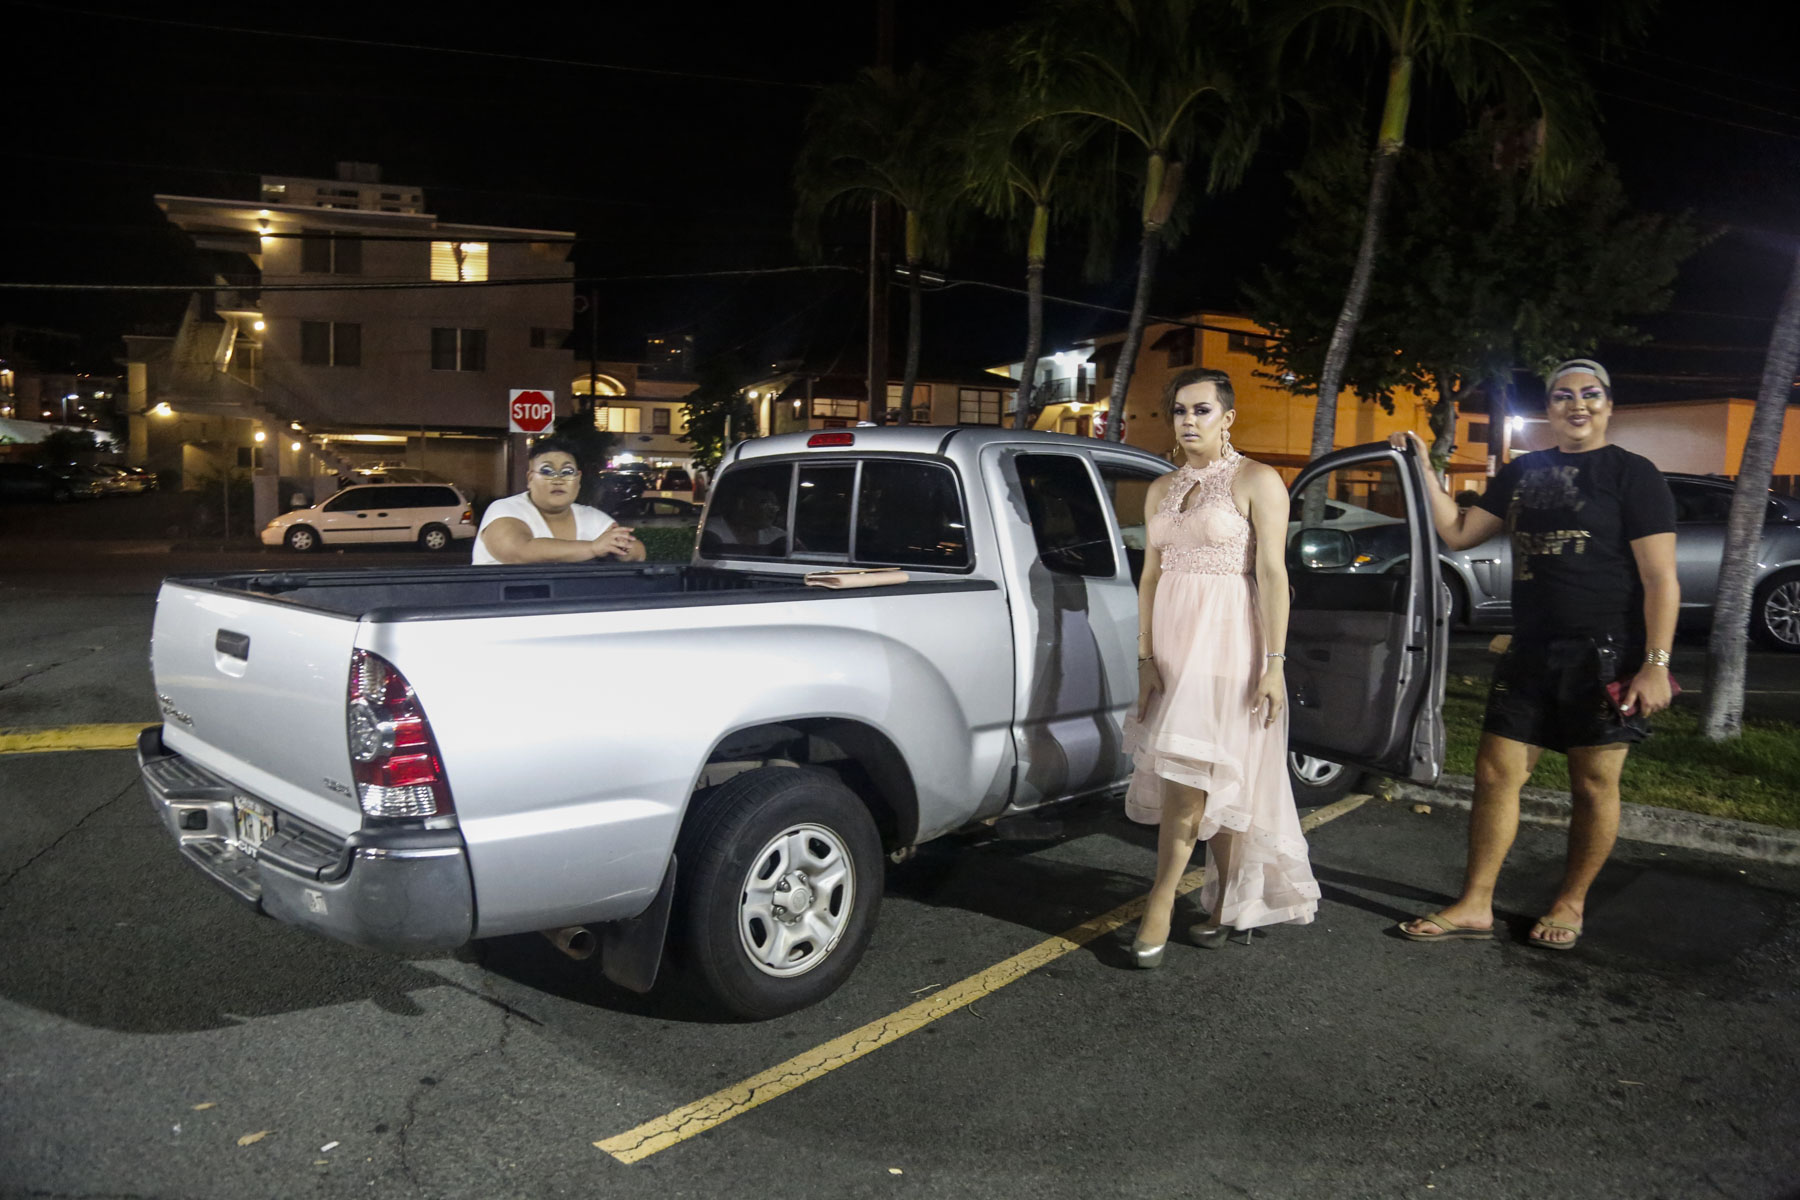  (From left to right) Water Melone, Aria Del Rey and Apple Aday pose for a portrait in front of Water Melone's truck at Zippy's in Makiki, HI after Drag Prom.&nbsp; 